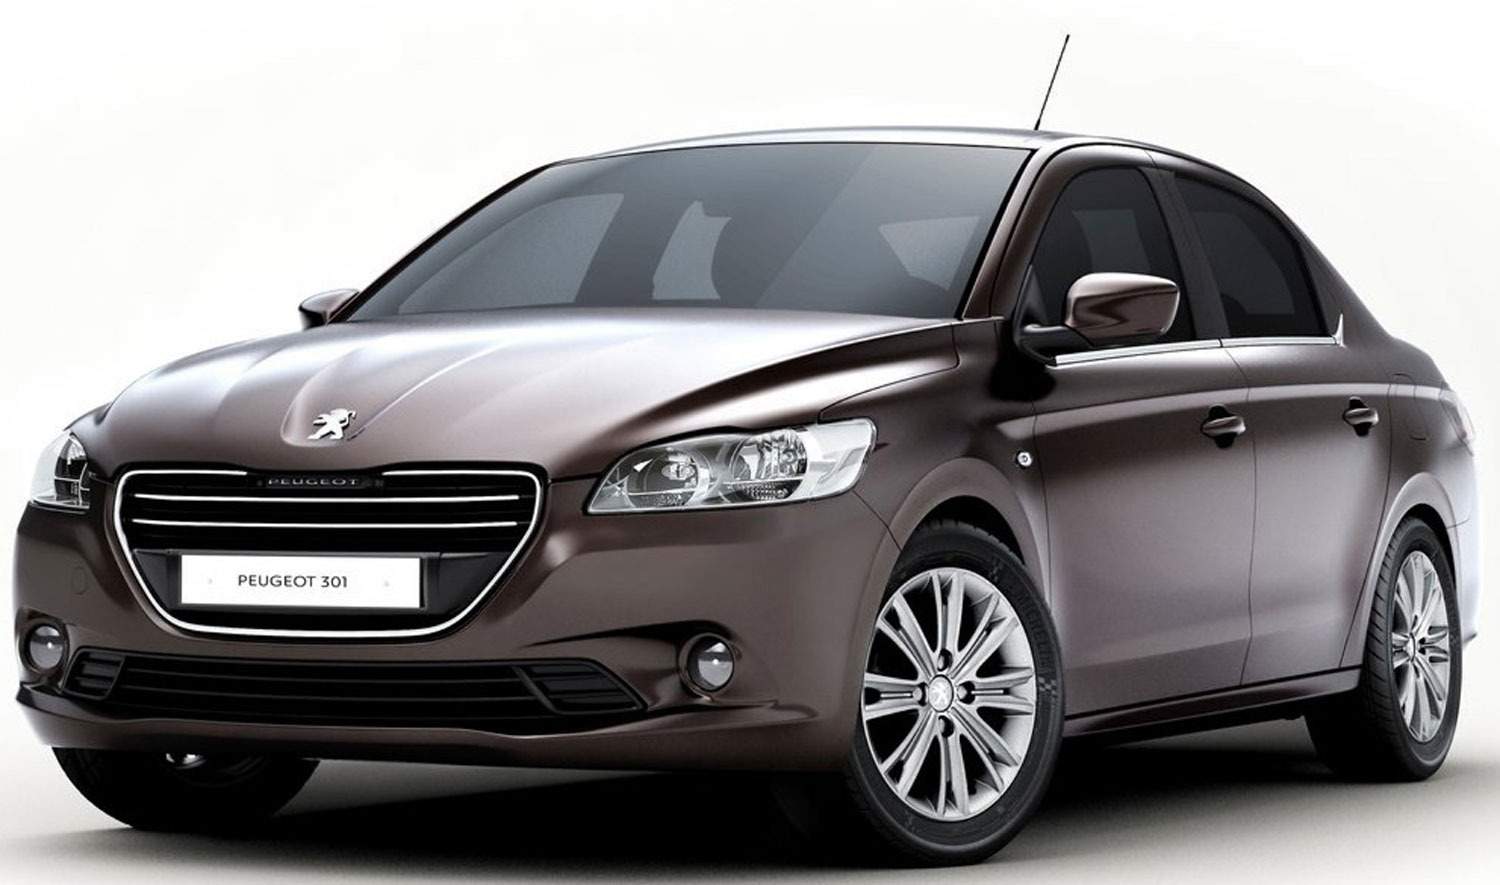 Peugeot Beenleigh Serv Auto Care Service